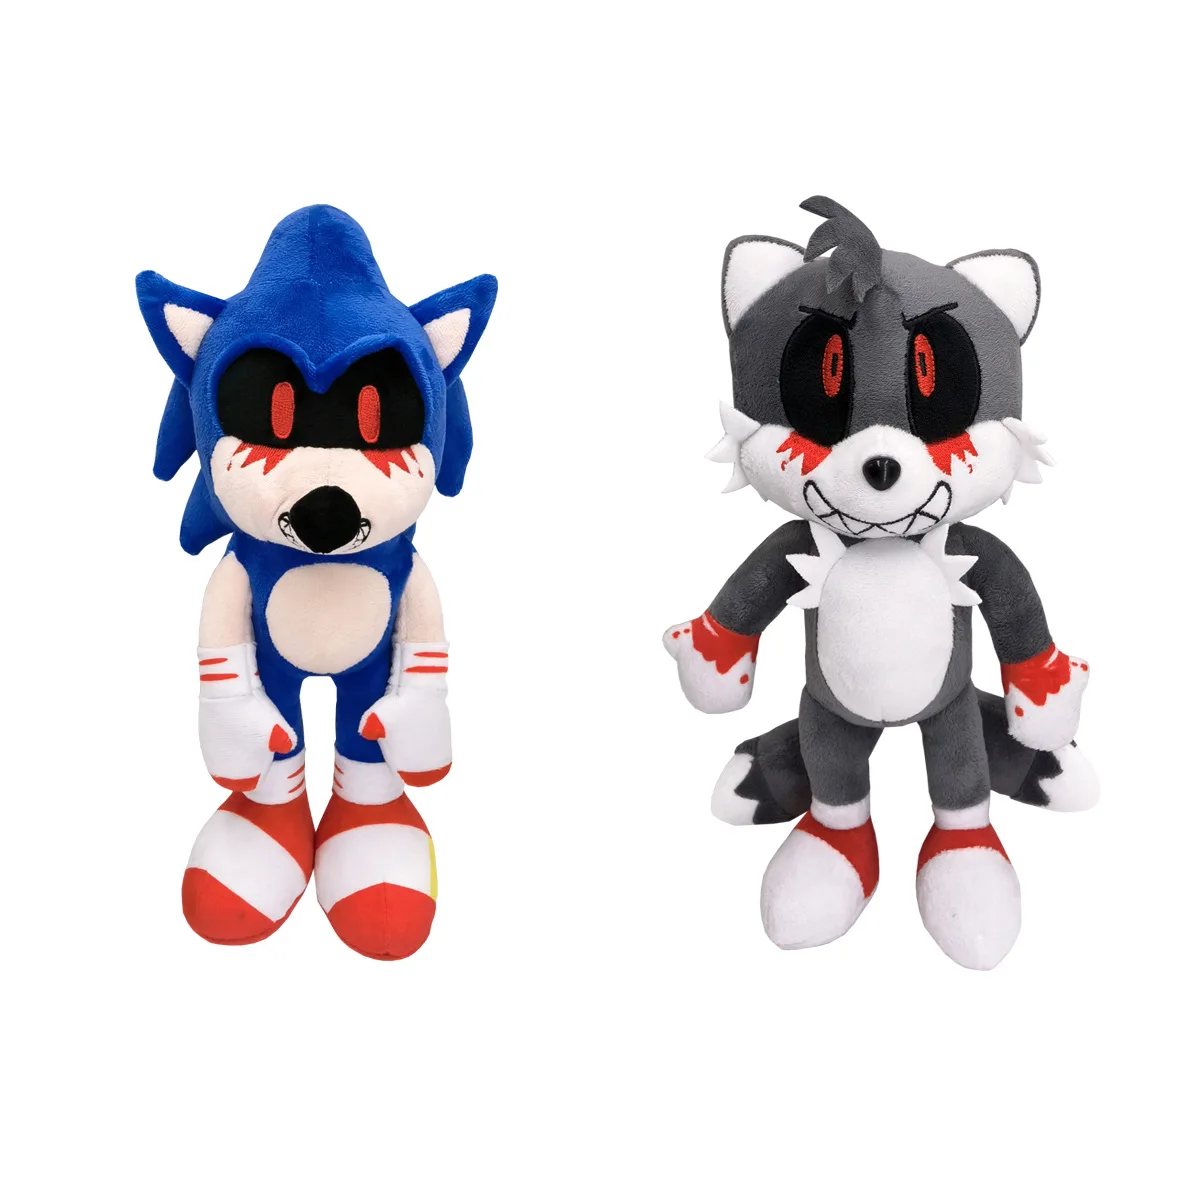 New Sonic the Hedgehog EXE Game Anime Doll Toy Sonic Plush Doll